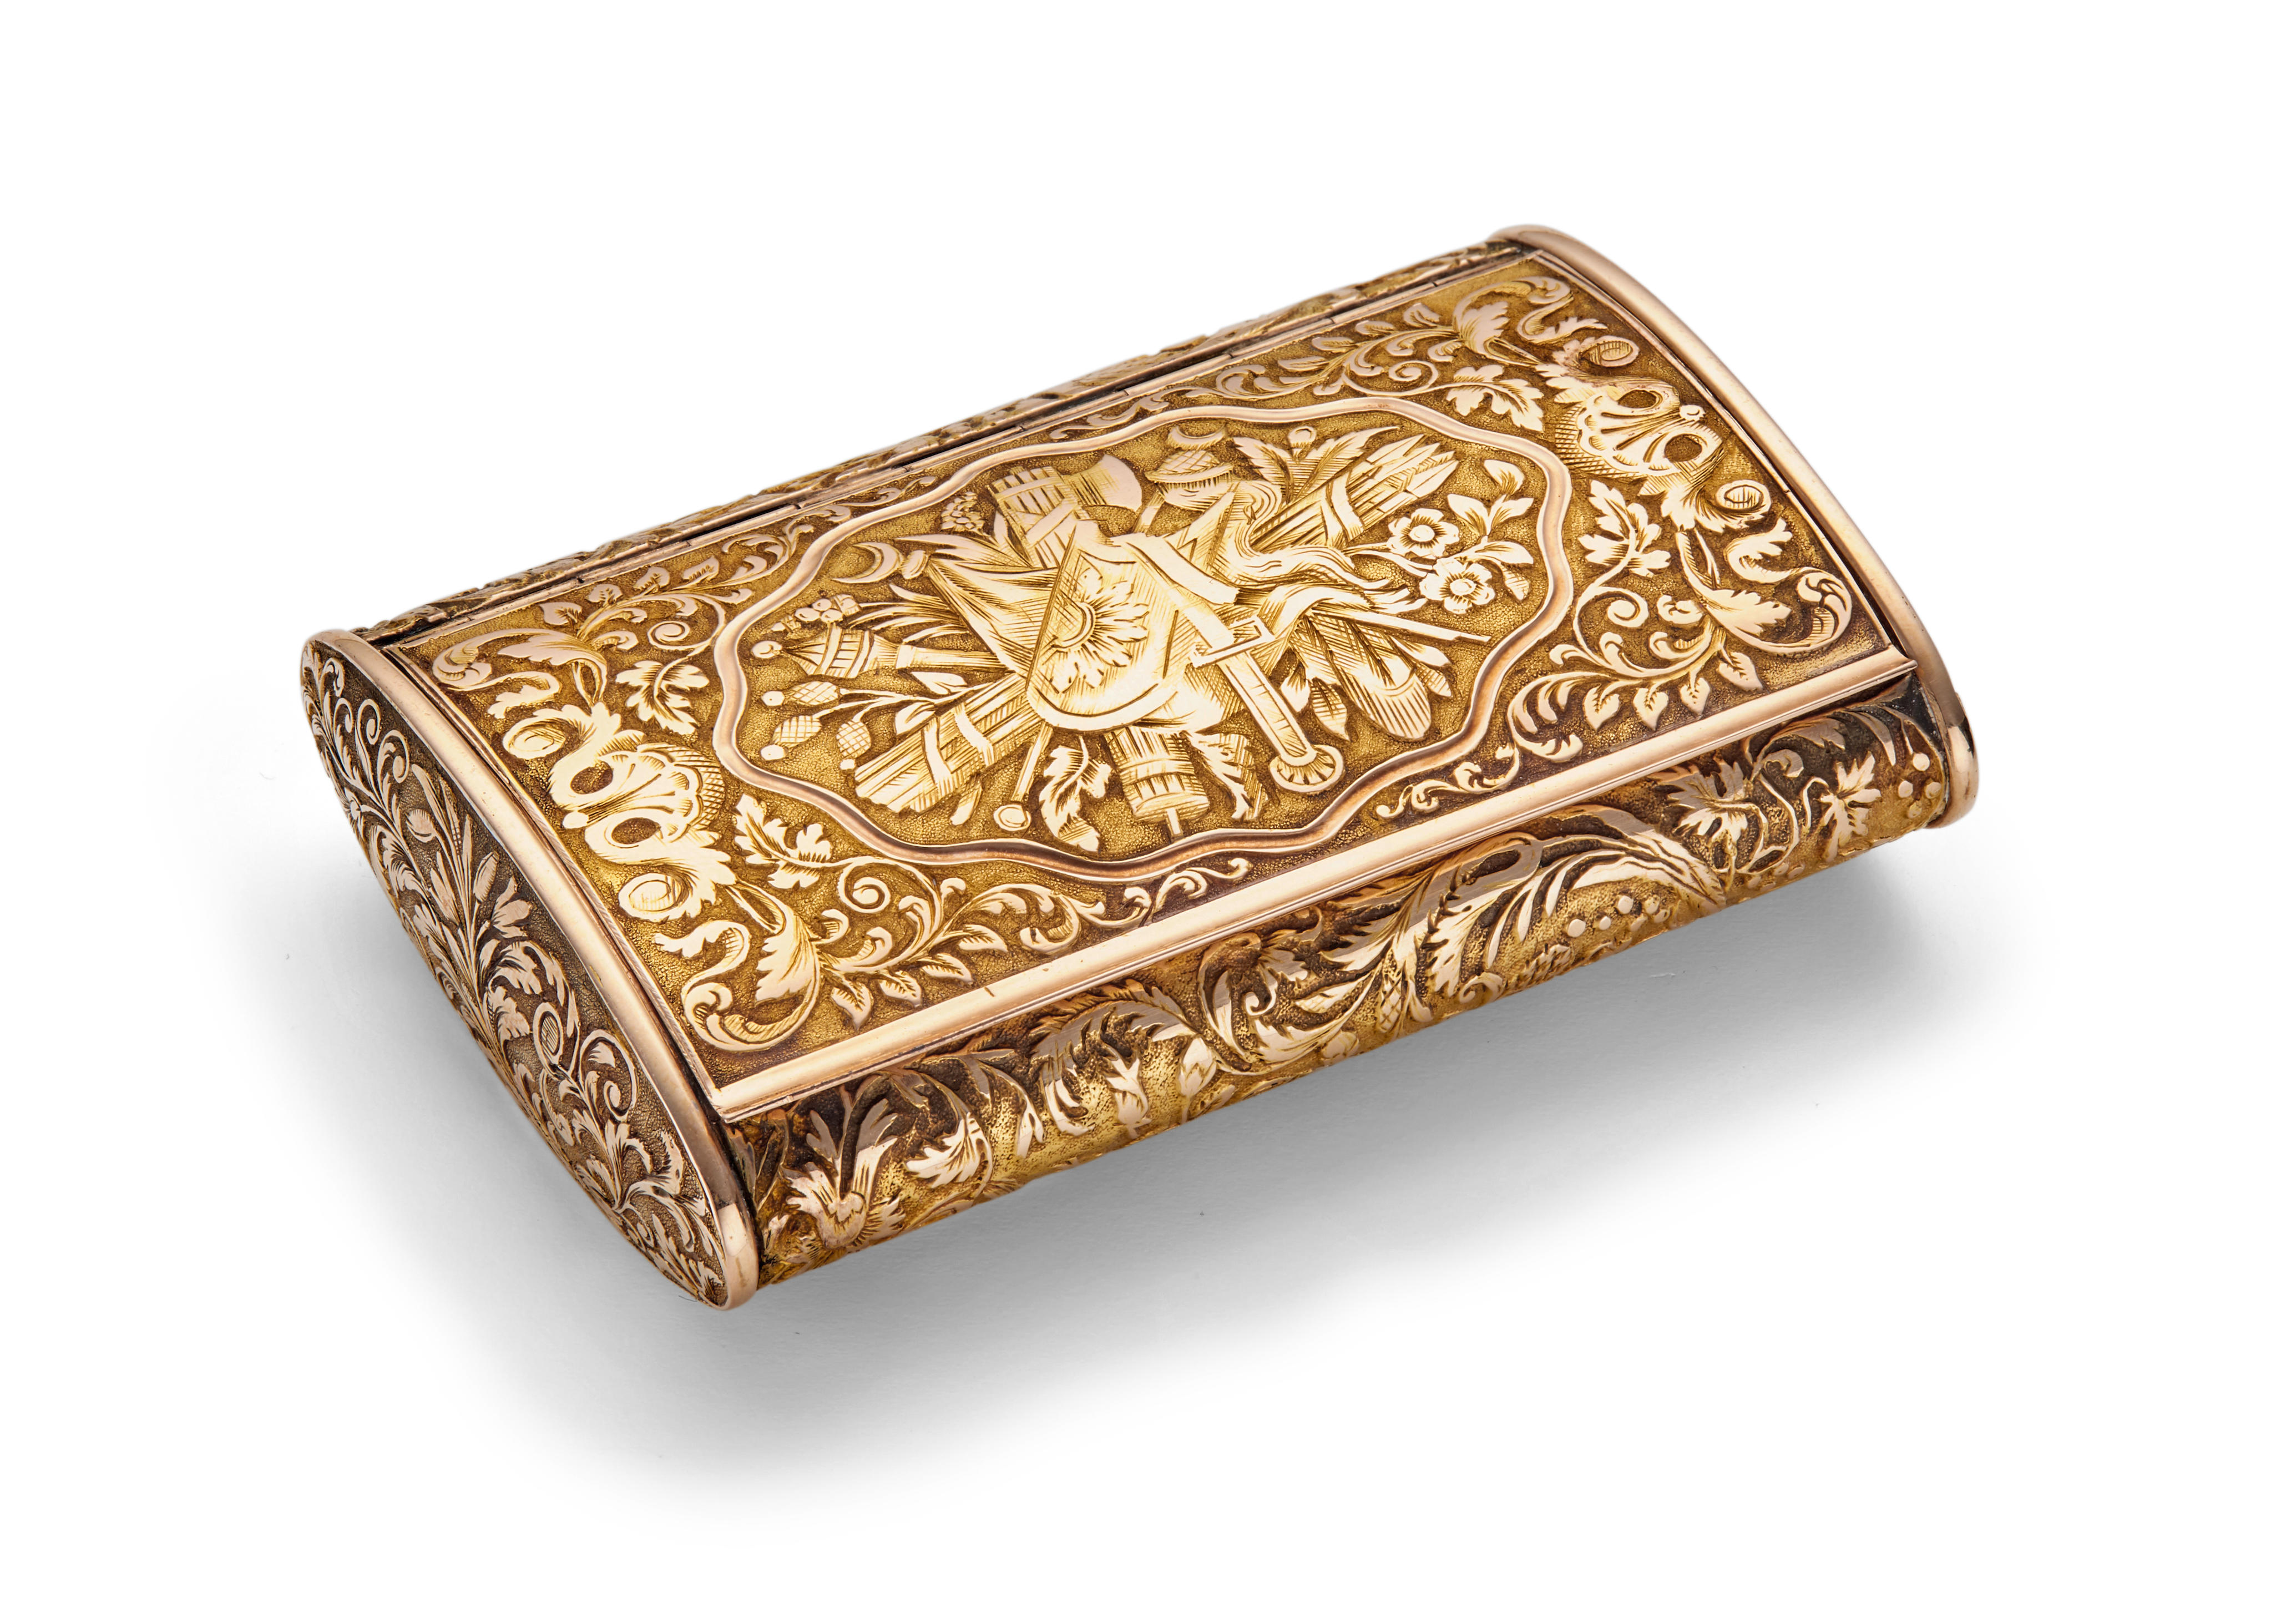 A continental chased and engraved snuff box for the Turkish market